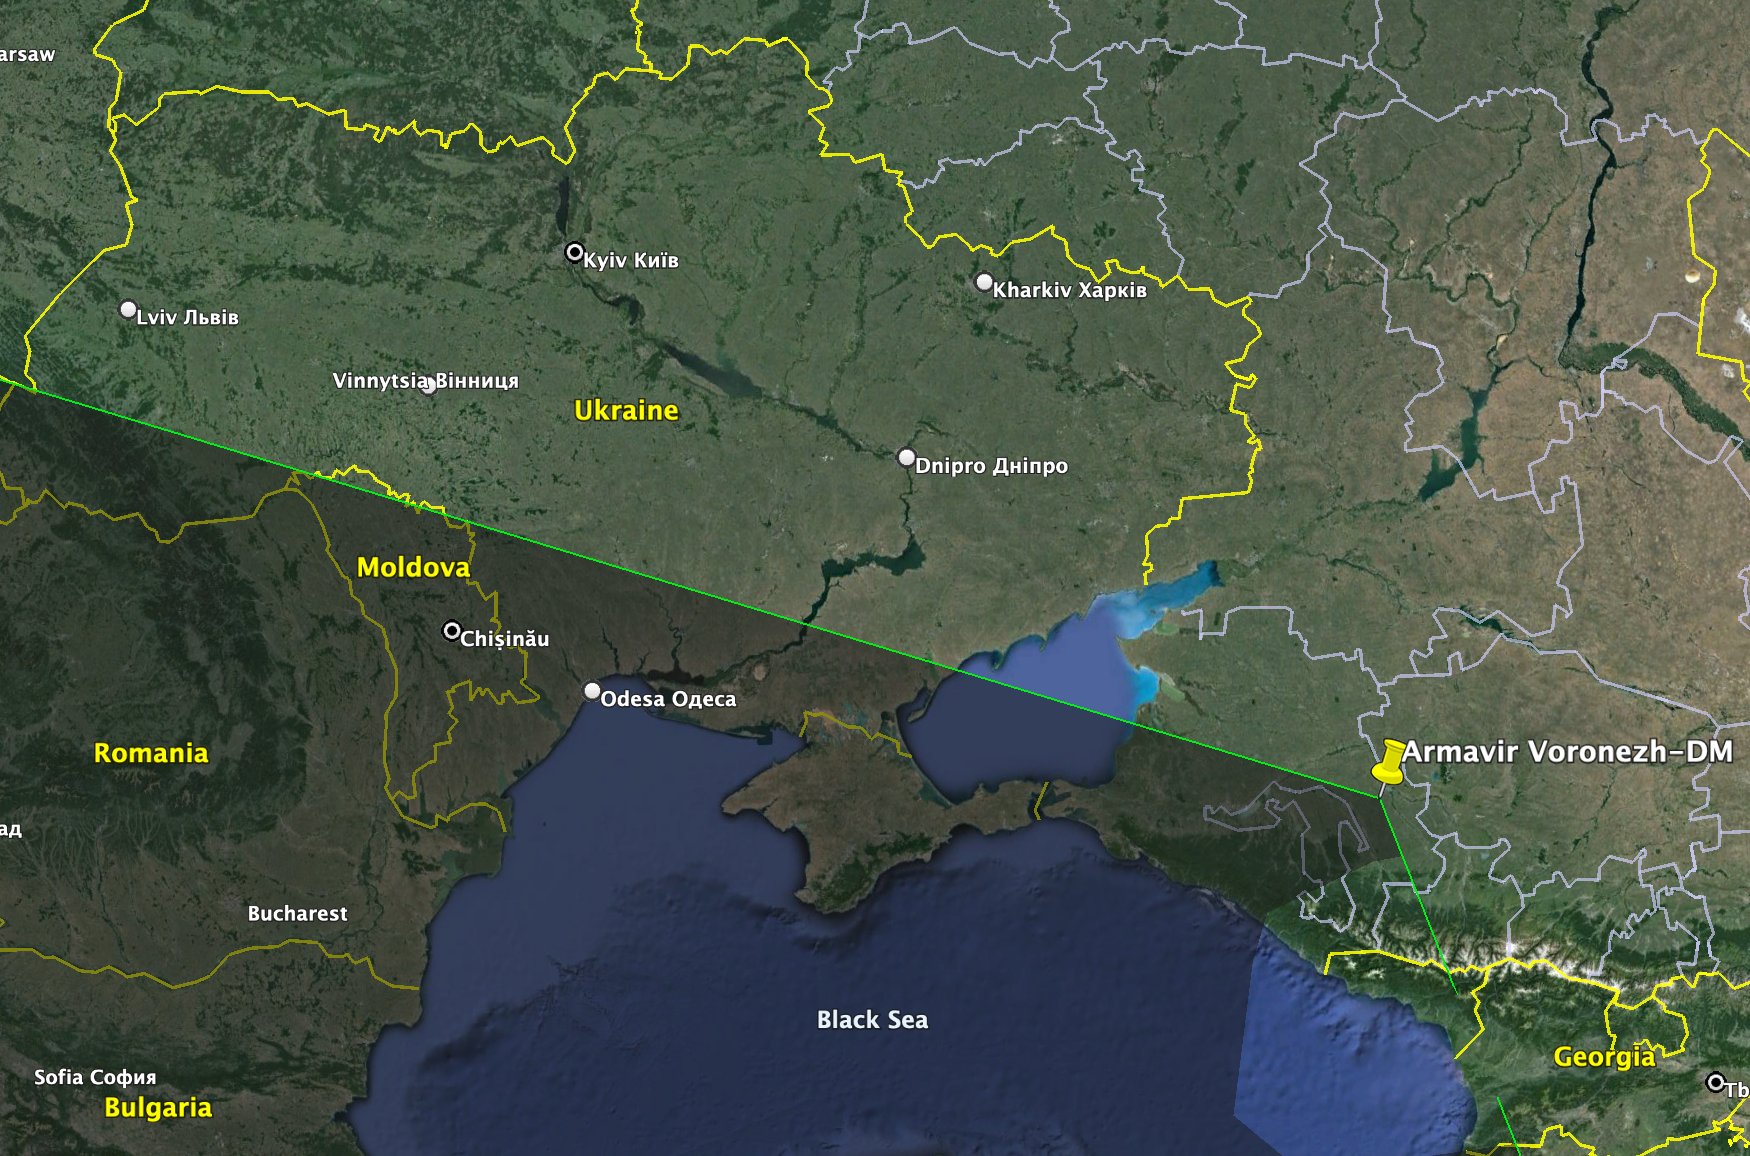 The loss of a strategic early warning radar system by Russia could have broader implications